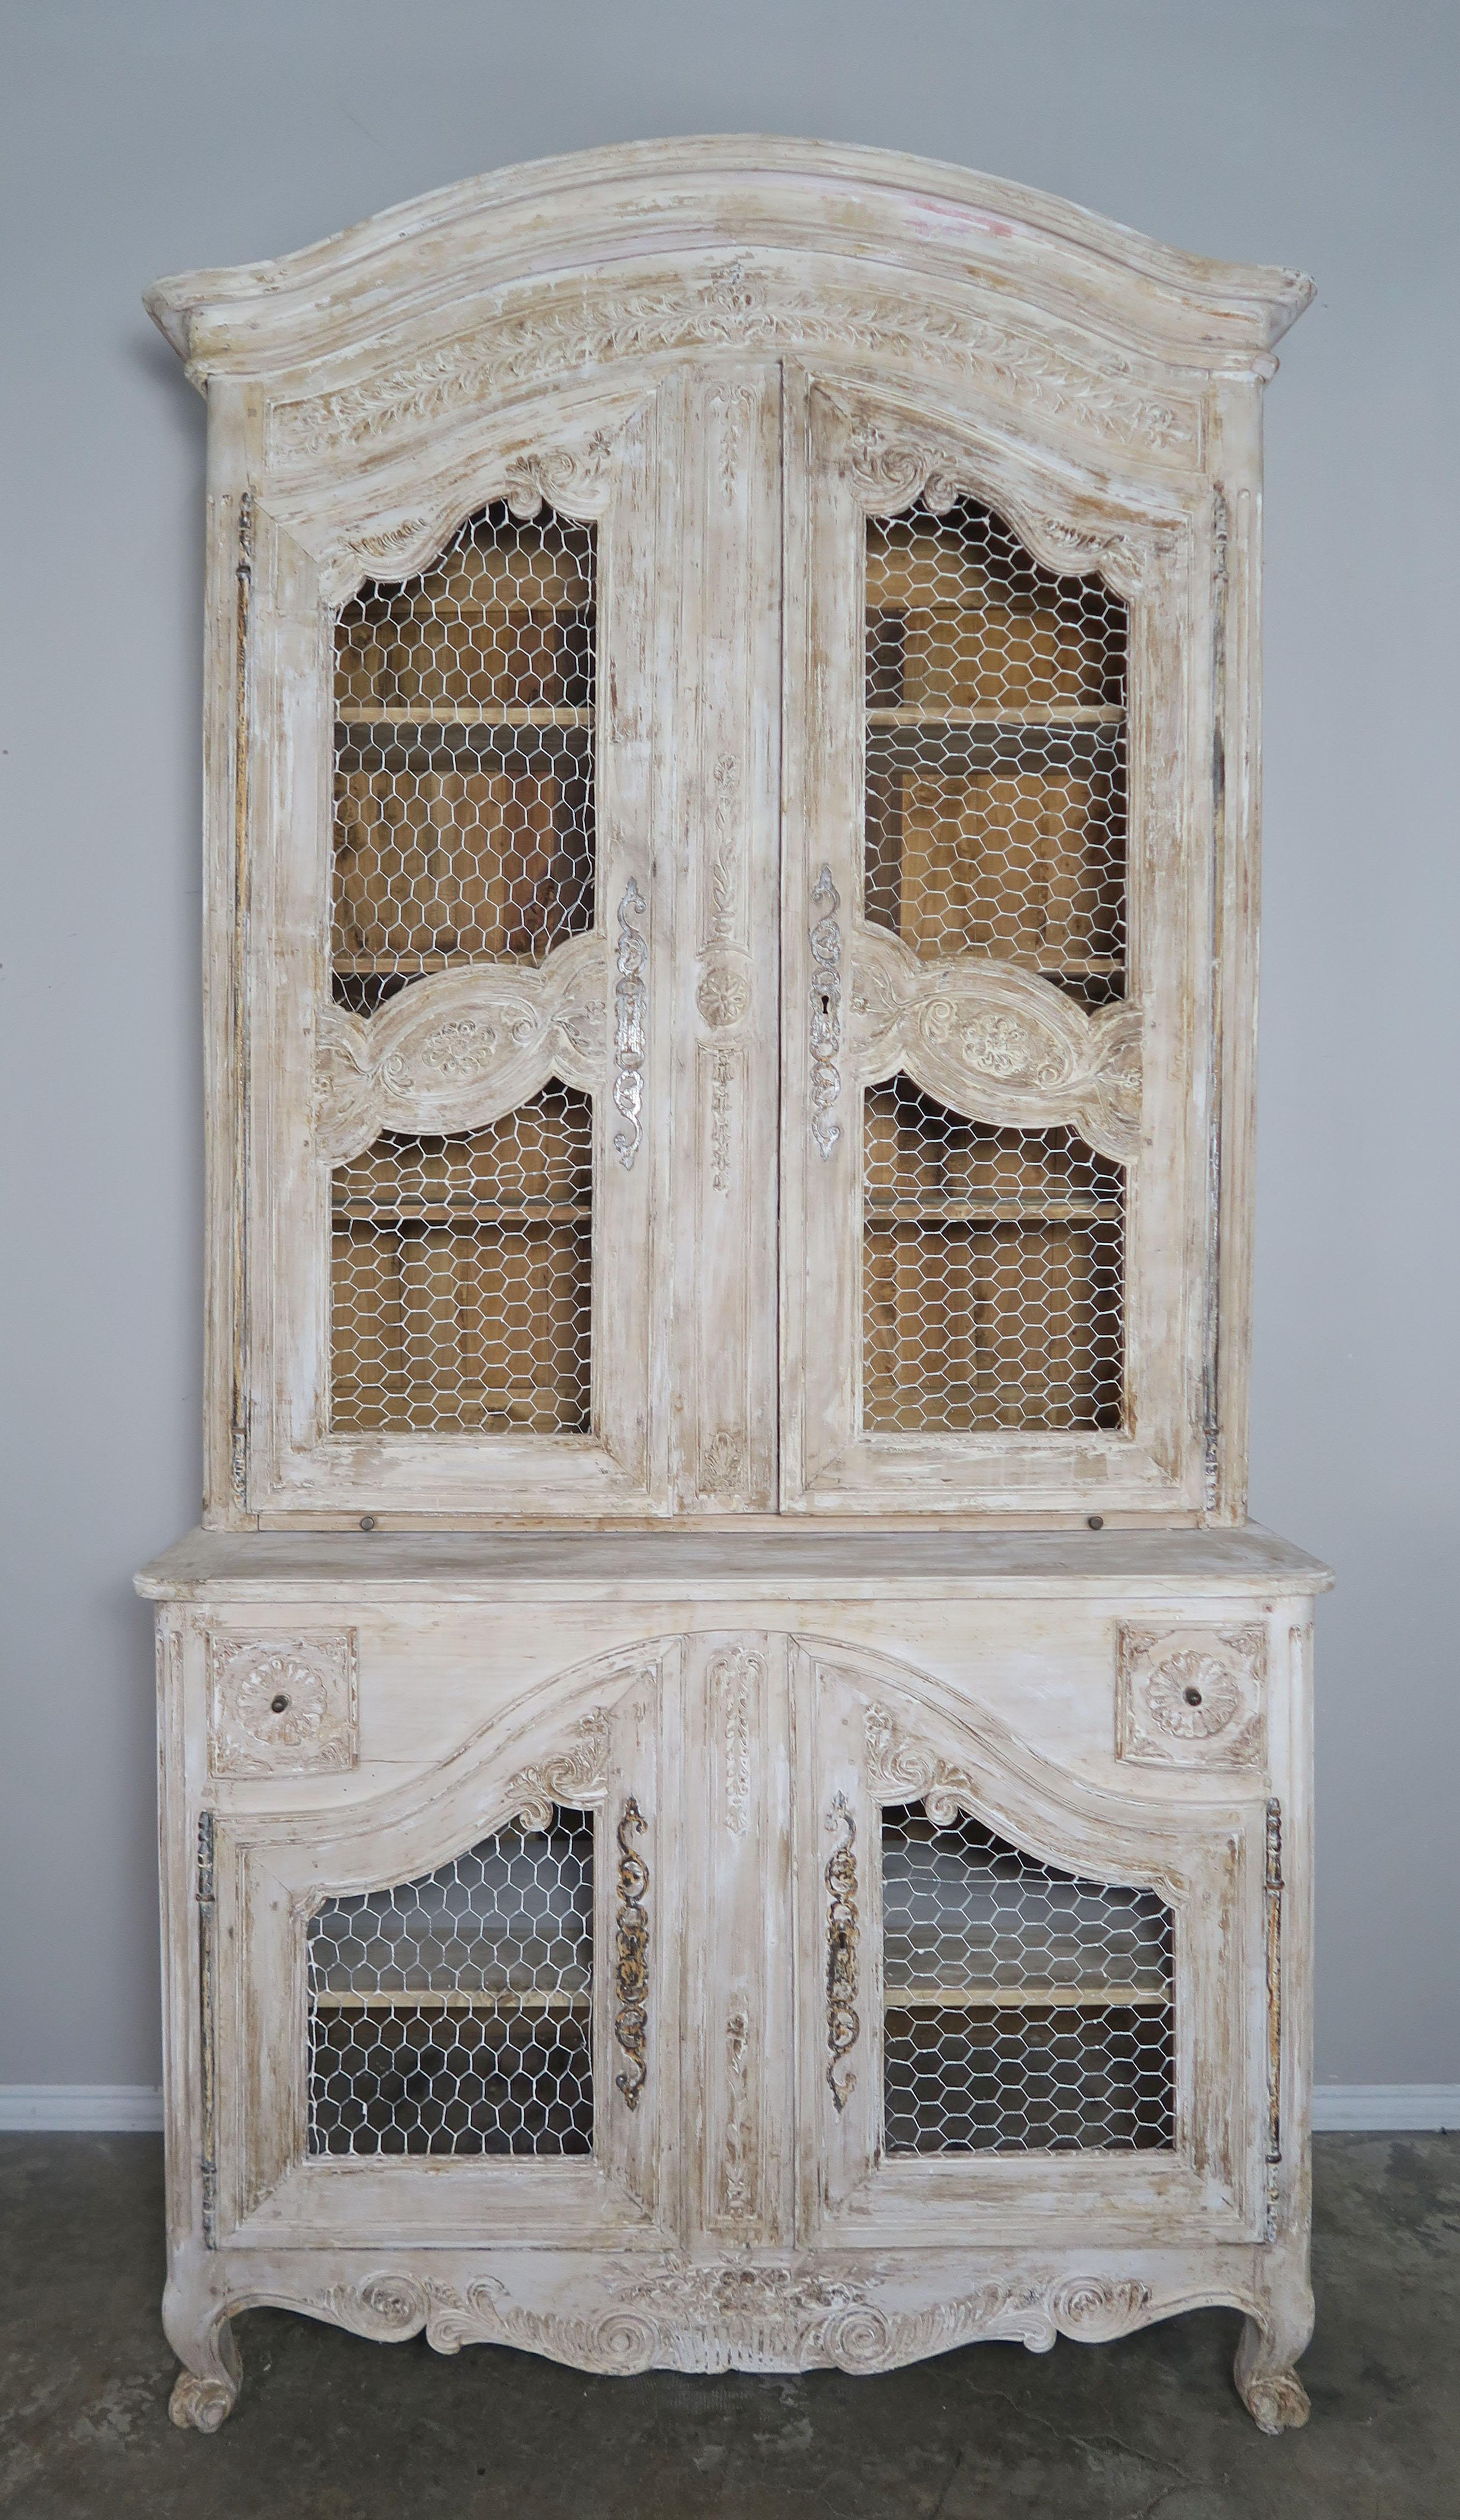 18th century painted Louis XV style buffet de corps with chicken wire. The stunning cabinet stands on four cabriole legs. Four separate doors open up to shelves with ample storage inside. There are two accent drawers as well. Worn paint with wood